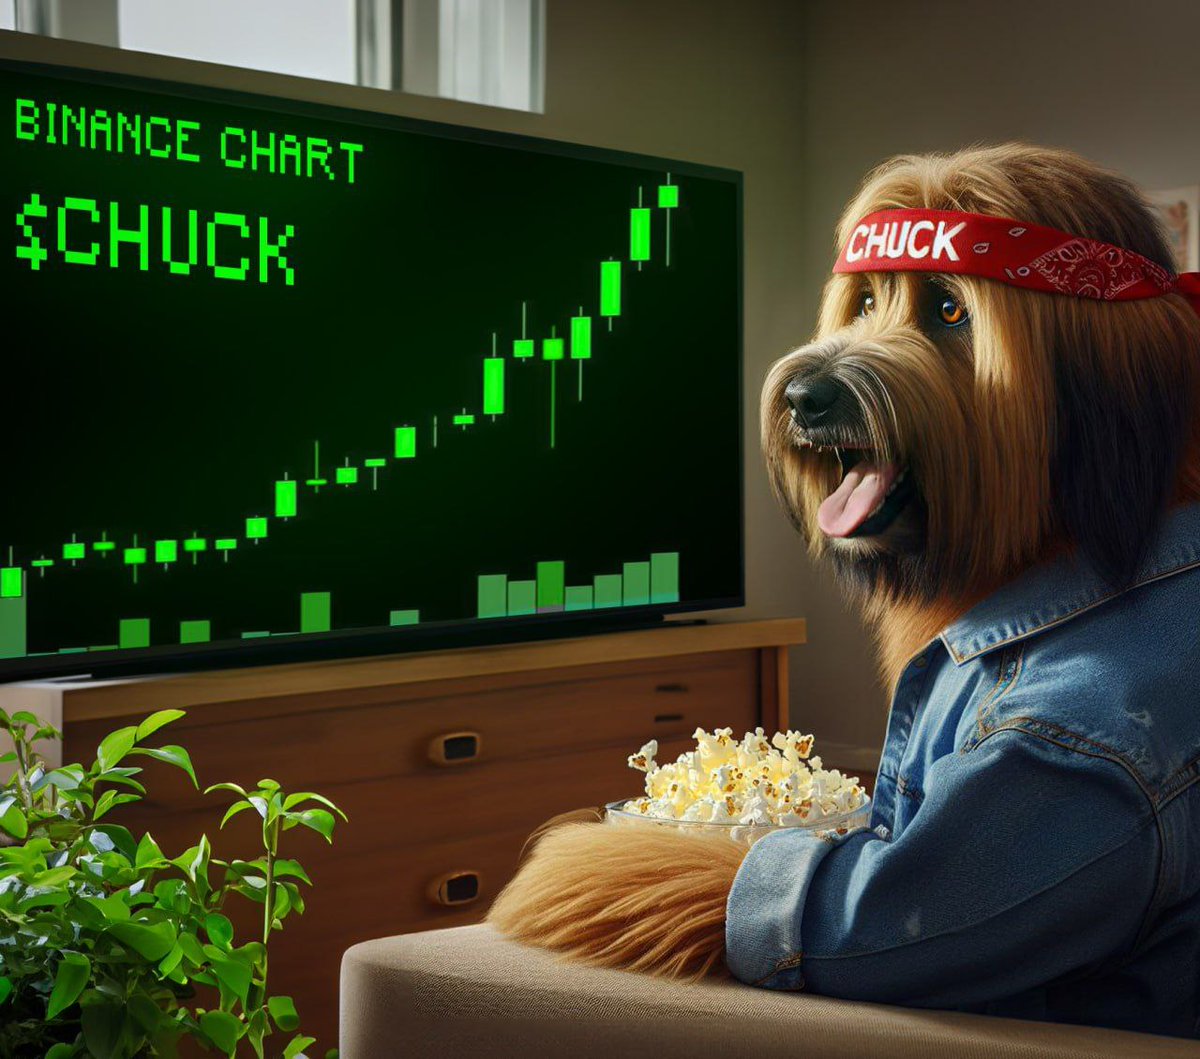 @DogeArmy1000x @CHUCK_on_Base This project is insane! $CHUCK @CHUCK_on_Base CA: 0x7A8A5012022BCCBf3EA4b03cD2bb5583d915fb1A🔗 $CHUCK does not sleep. He waits. ($CHUCK ON BASE) If you spell $CHUCK in Scrabble, you win. Forever. ($CHUCK ON BASE)